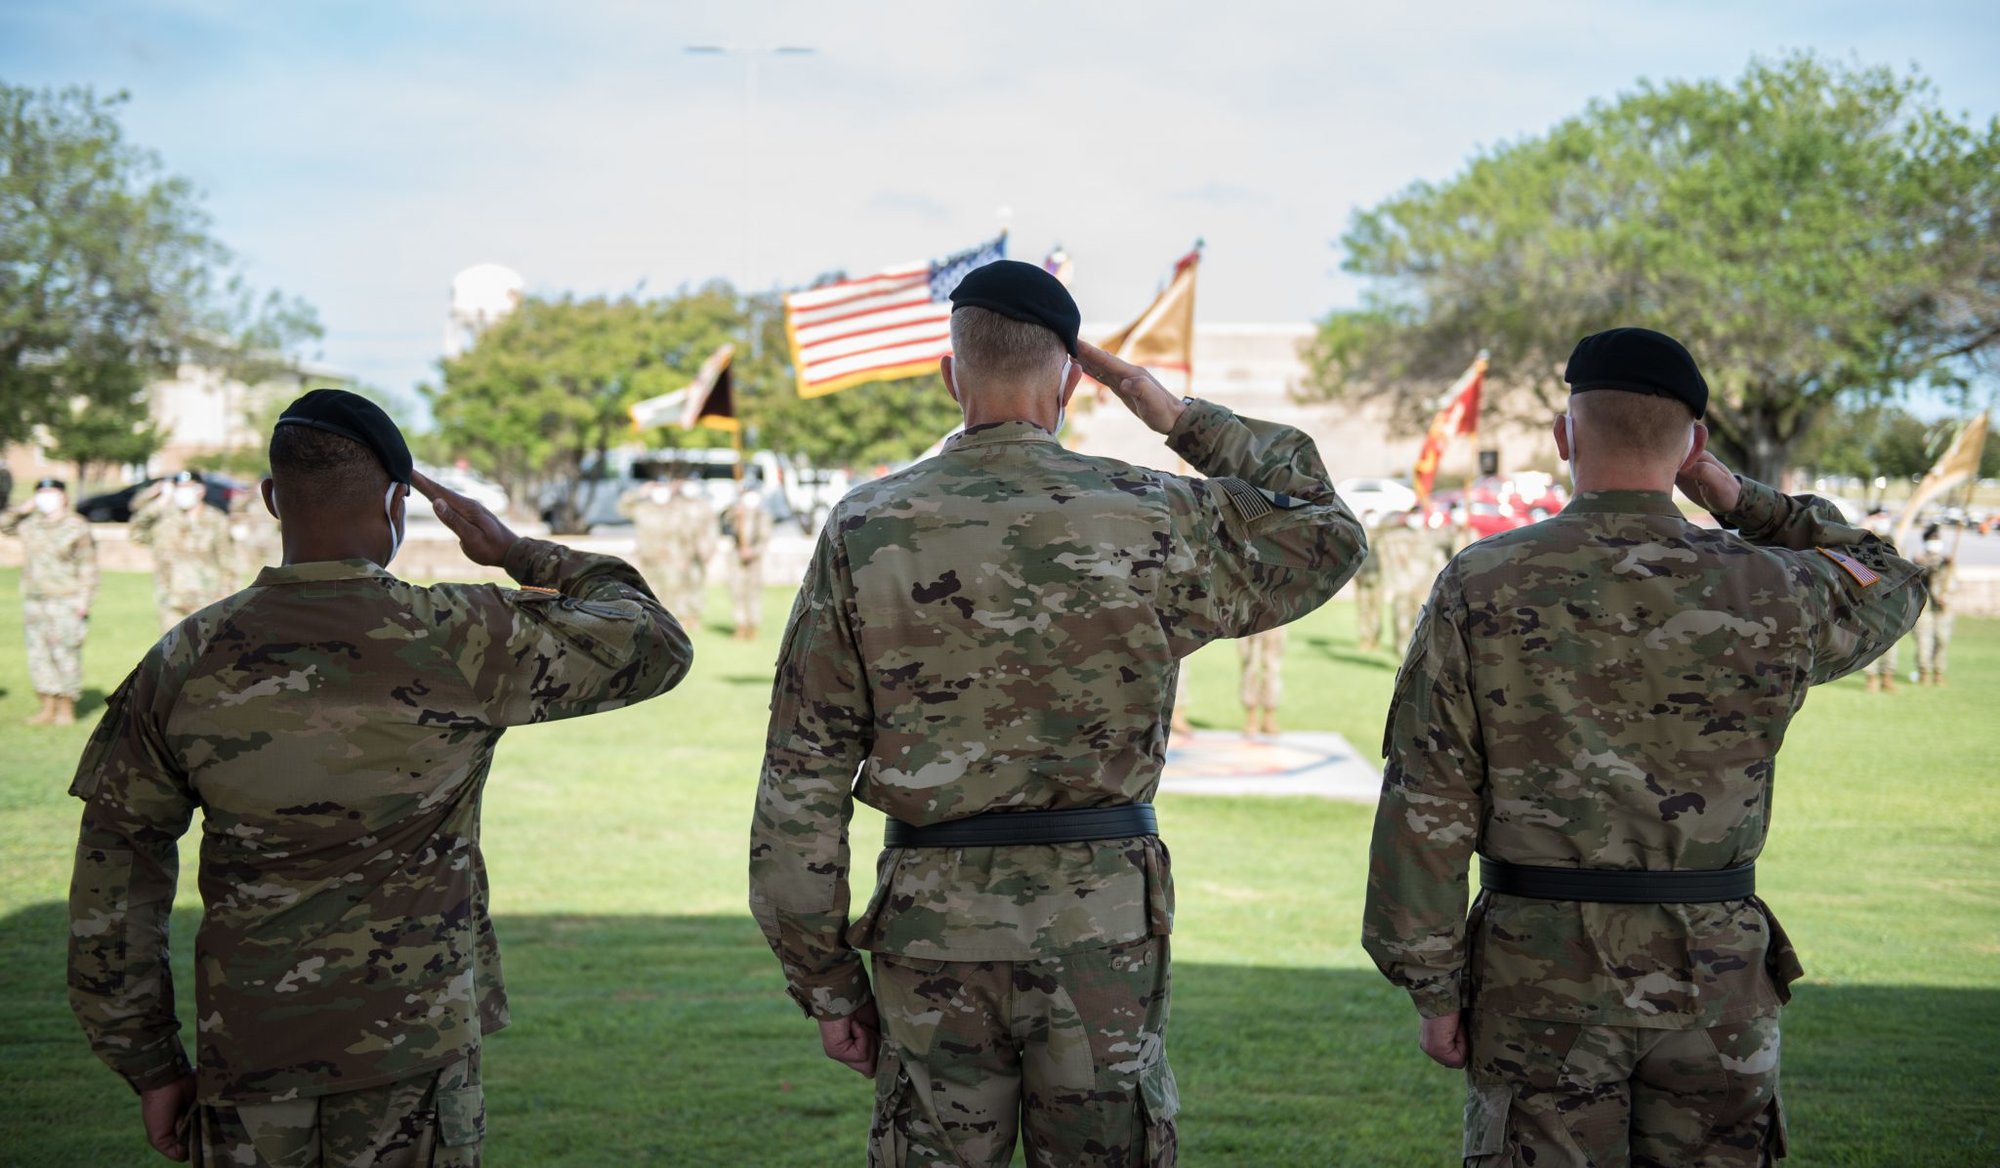 (From left to right) 13th ESC Commanding General, Col. (P) Ronald R. Ragin, Maj. Gen. Scott Efflandt, Deputy Commanding General, III Corps and Fort Hood and outgoing Commanding General, Brig. Gen. Darren L. Werner, salute before passing the colors. (U.S. Army photo by Sgt. 1st Class Kelvin Ringold)